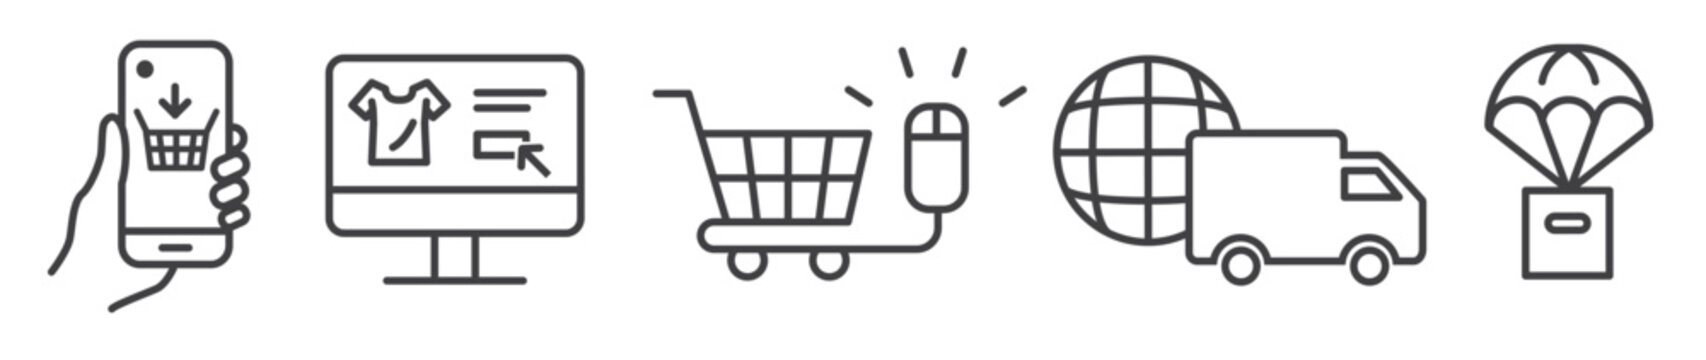 e commerce and online shopping vector line icons - thin line icon collection on white background